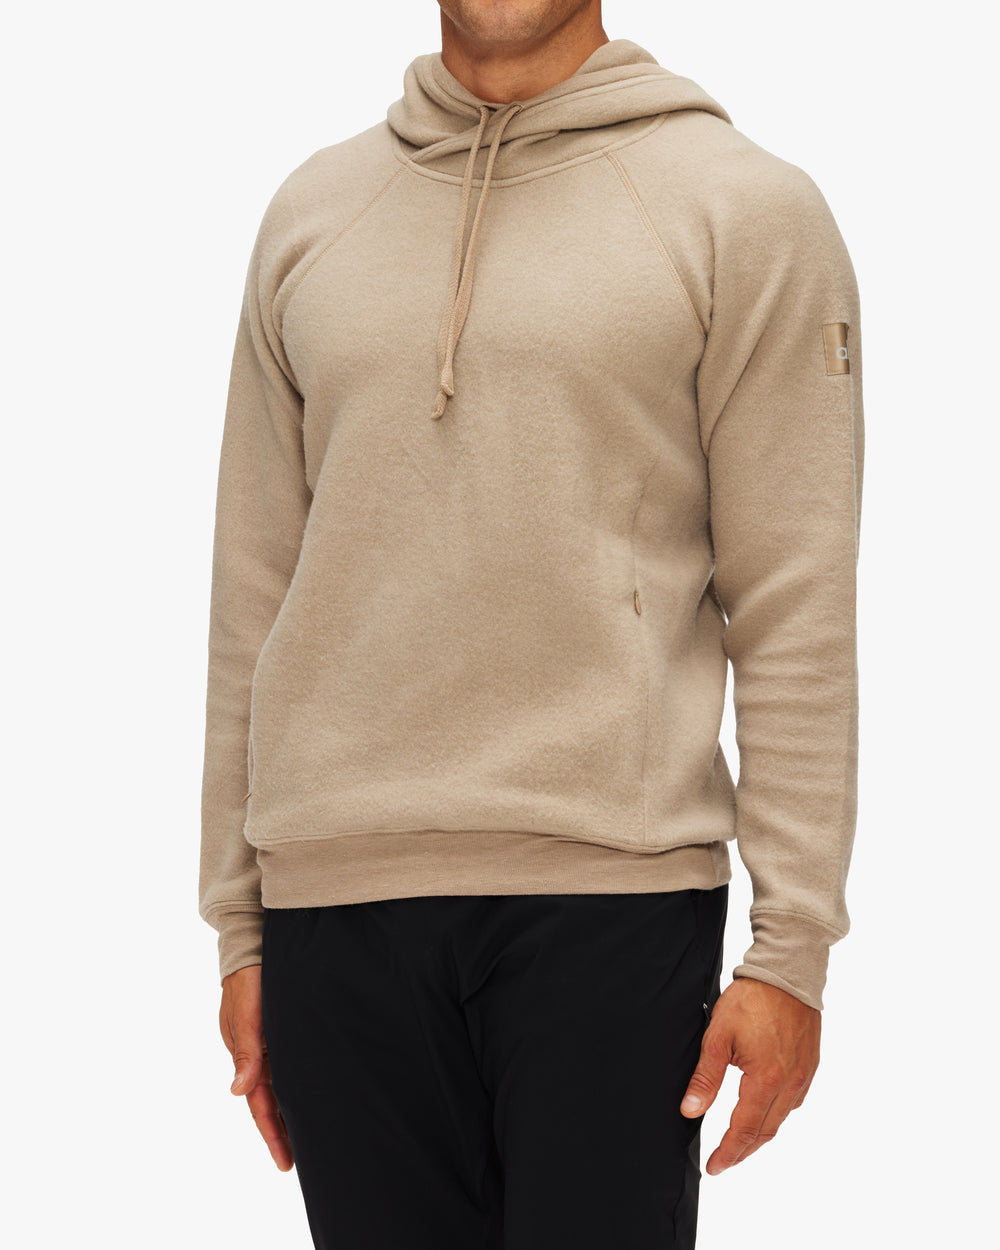 The Conquer Hoodie - Gravel